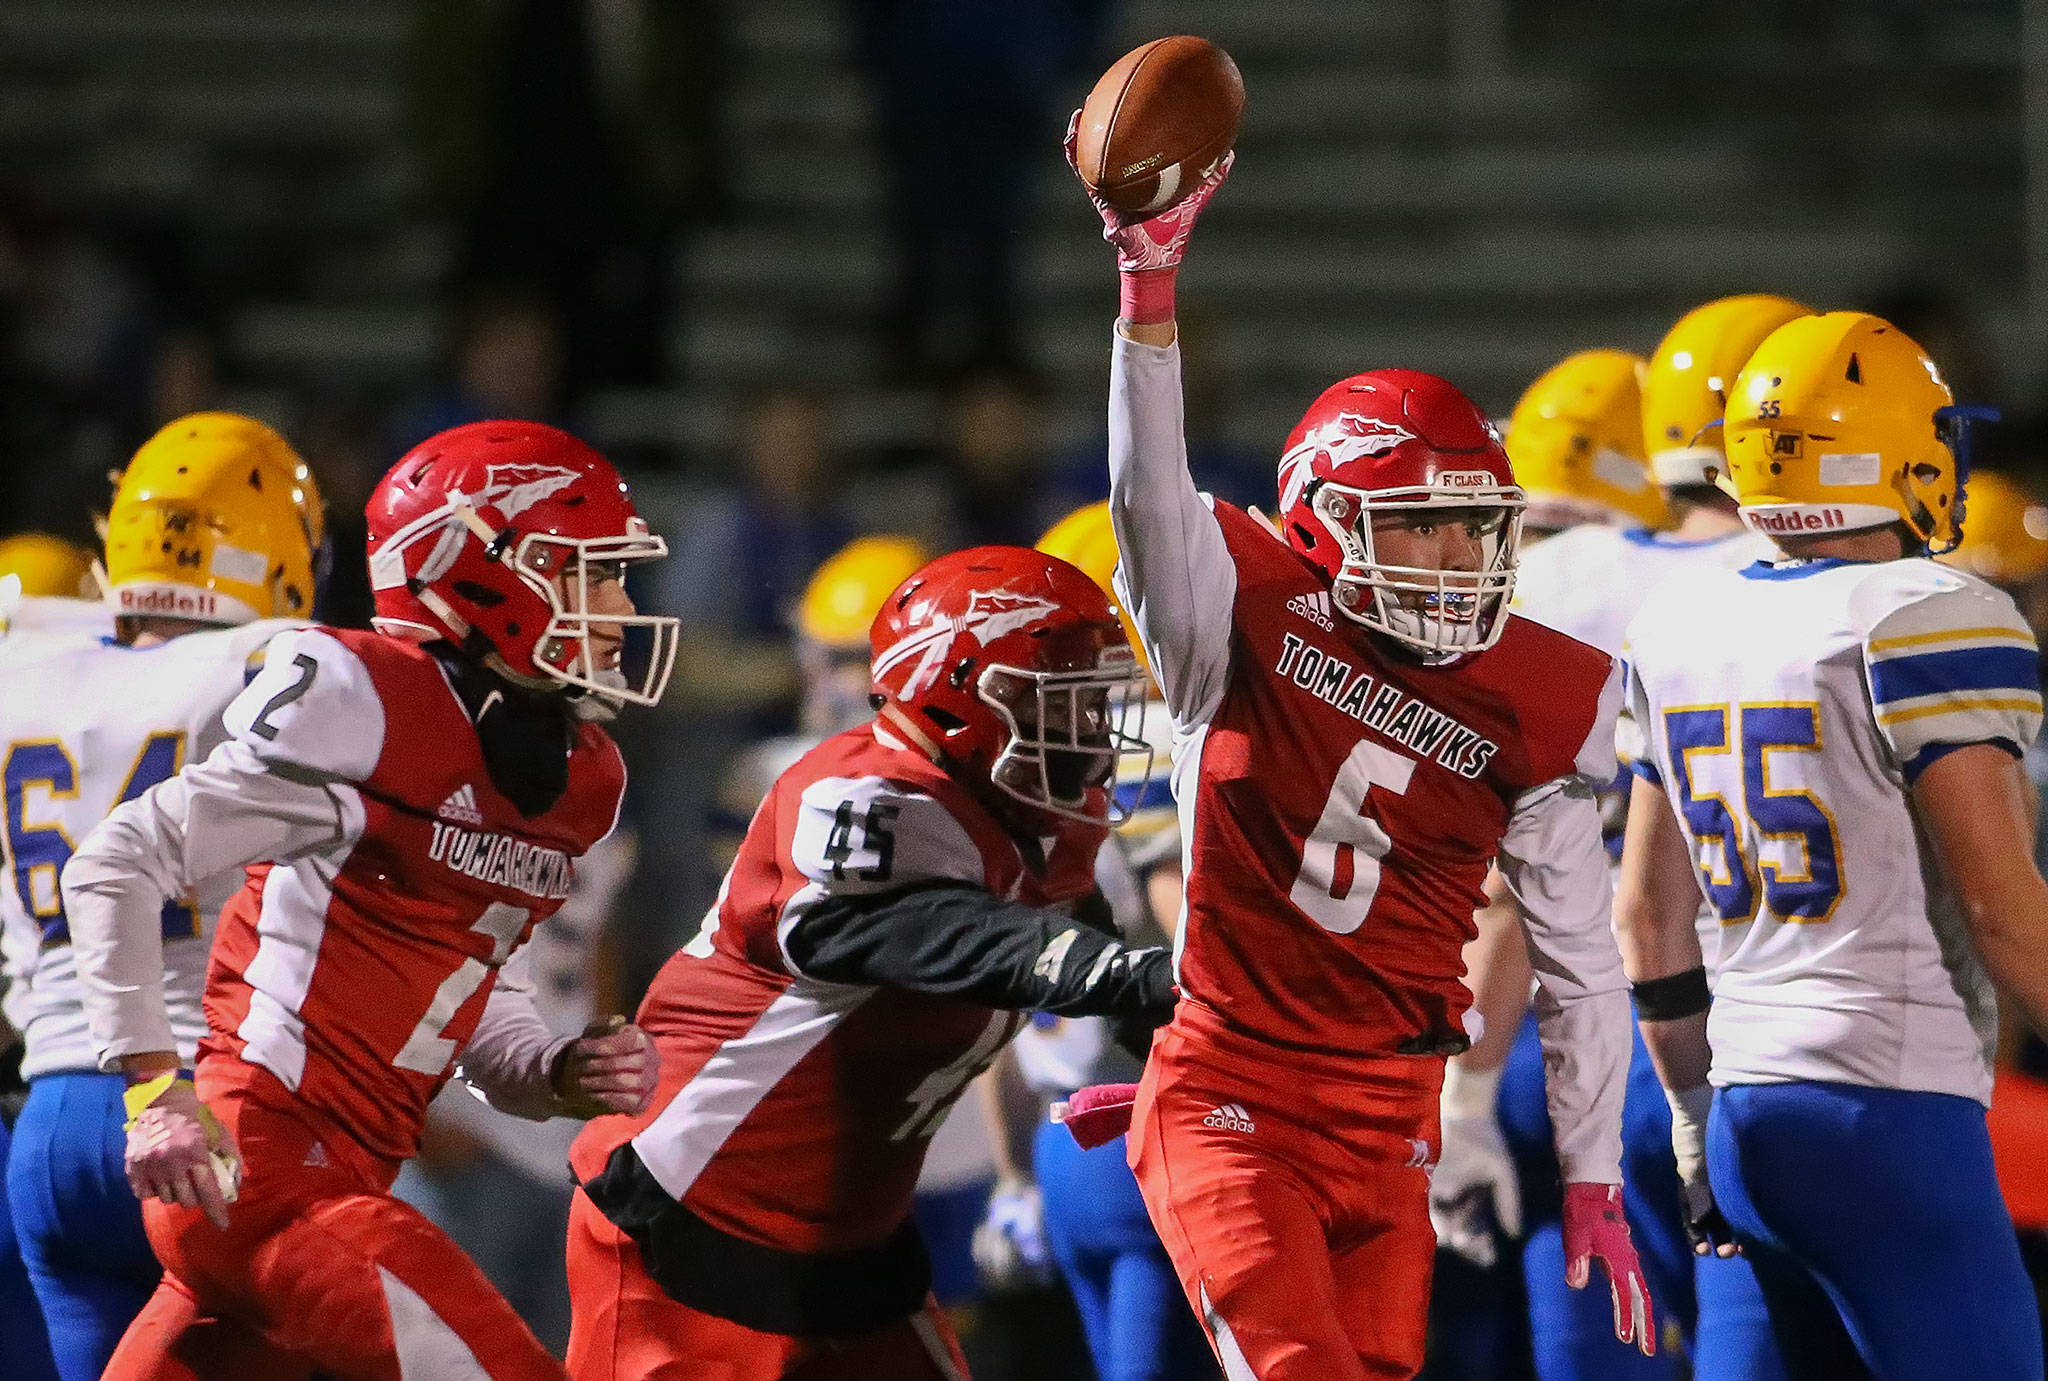 Marysville Pilchuck remained unbeaten and moved one step closer to the Wesco 3A North title with a 42-14 win over Ferndale on Friday night. (Kevin Clark / The Herald)